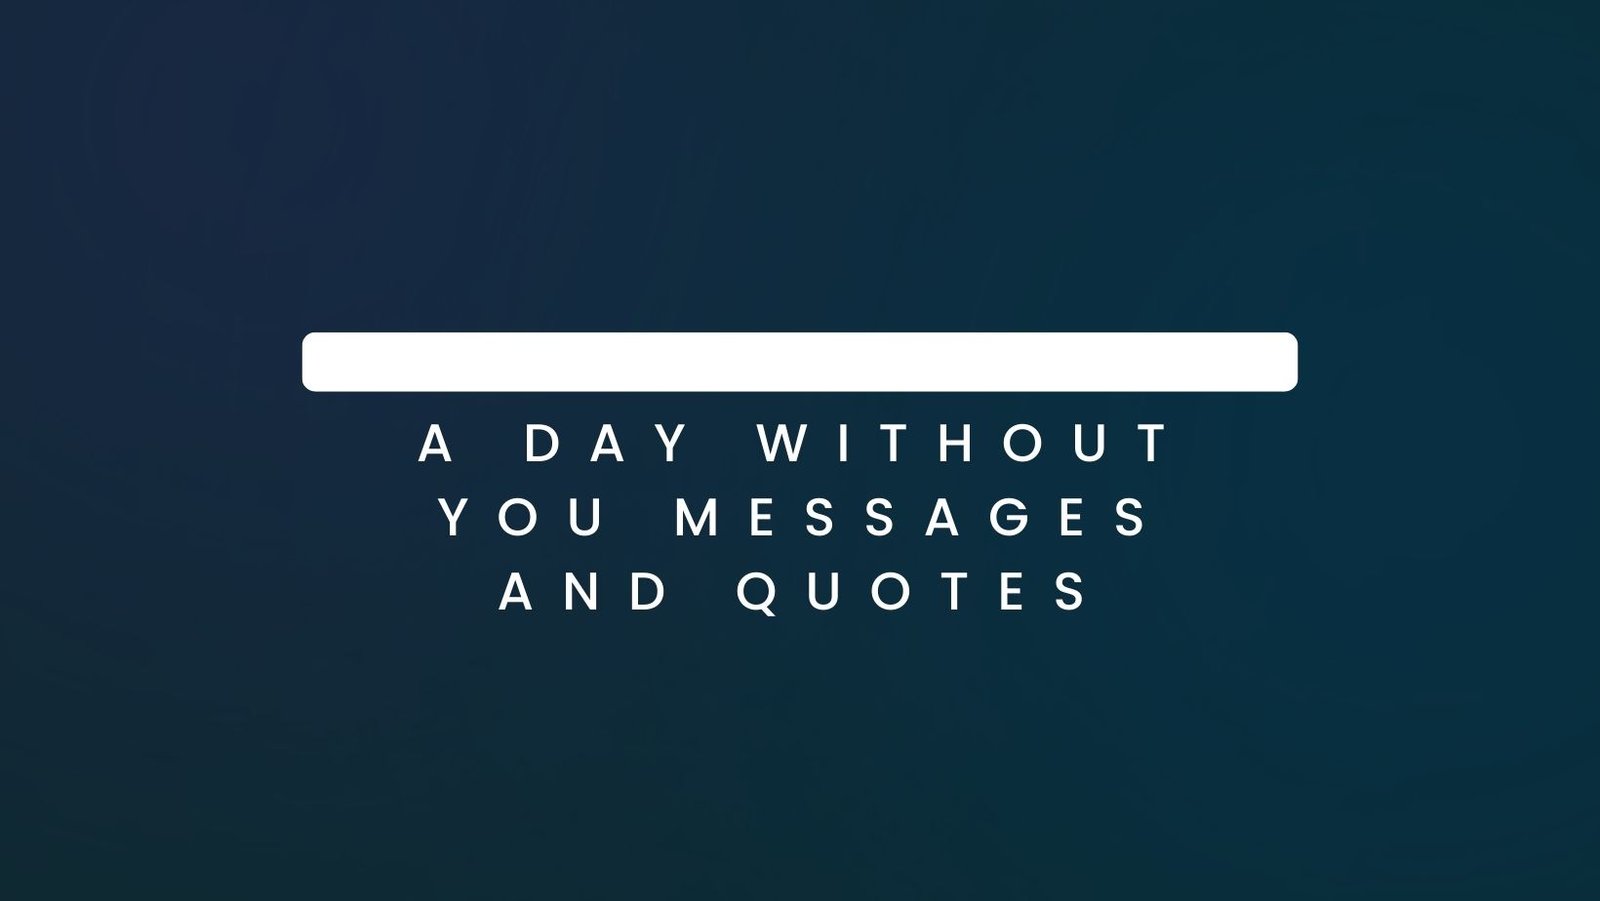 A Day Without You Messages and Quotes